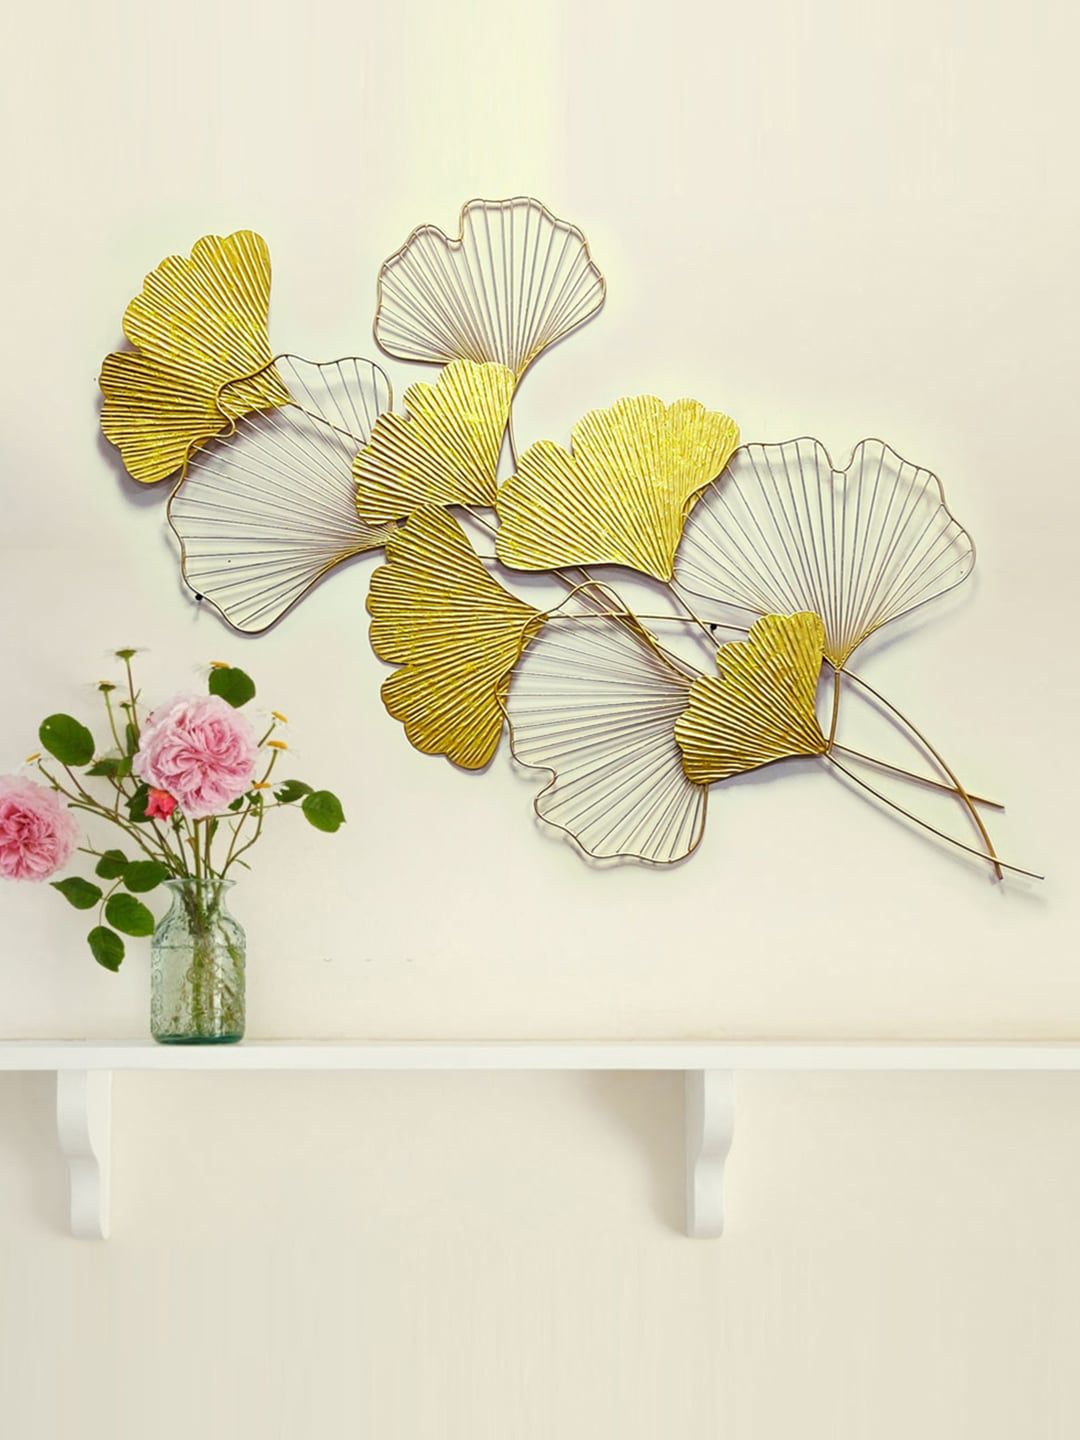 Wembley Toys Gold-Toned Metal Leaf Wall Decor Price in India